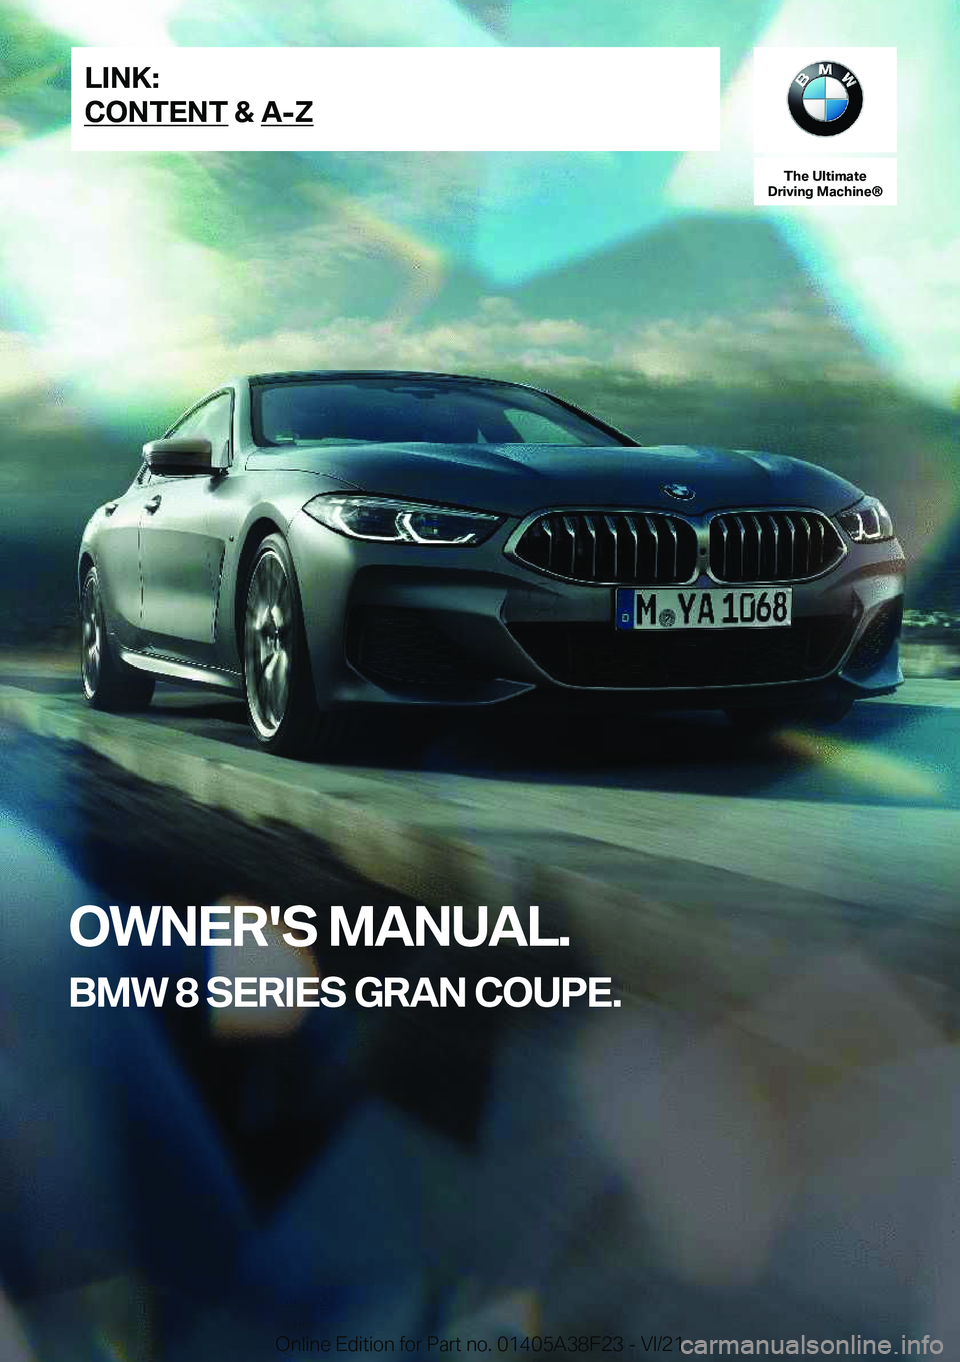 BMW 8 SERIES GRAN COUPE 2022  Owners Manual �T�h�e��U�l�t�i�m�a�t�e
�D�r�i�v�i�n�g��M�a�c�h�i�n�e�n
�O�W�N�E�R�'�S��M�A�N�U�A�L�.
�B�M�W��8��S�E�R�I�E�S��G�R�A�N��C�O�U�P�E�.�L�I�N�K�:
�C�O�N�T�E�N�T��&��A�-�Z�O�n�l�i�n�e��E�d�i�t